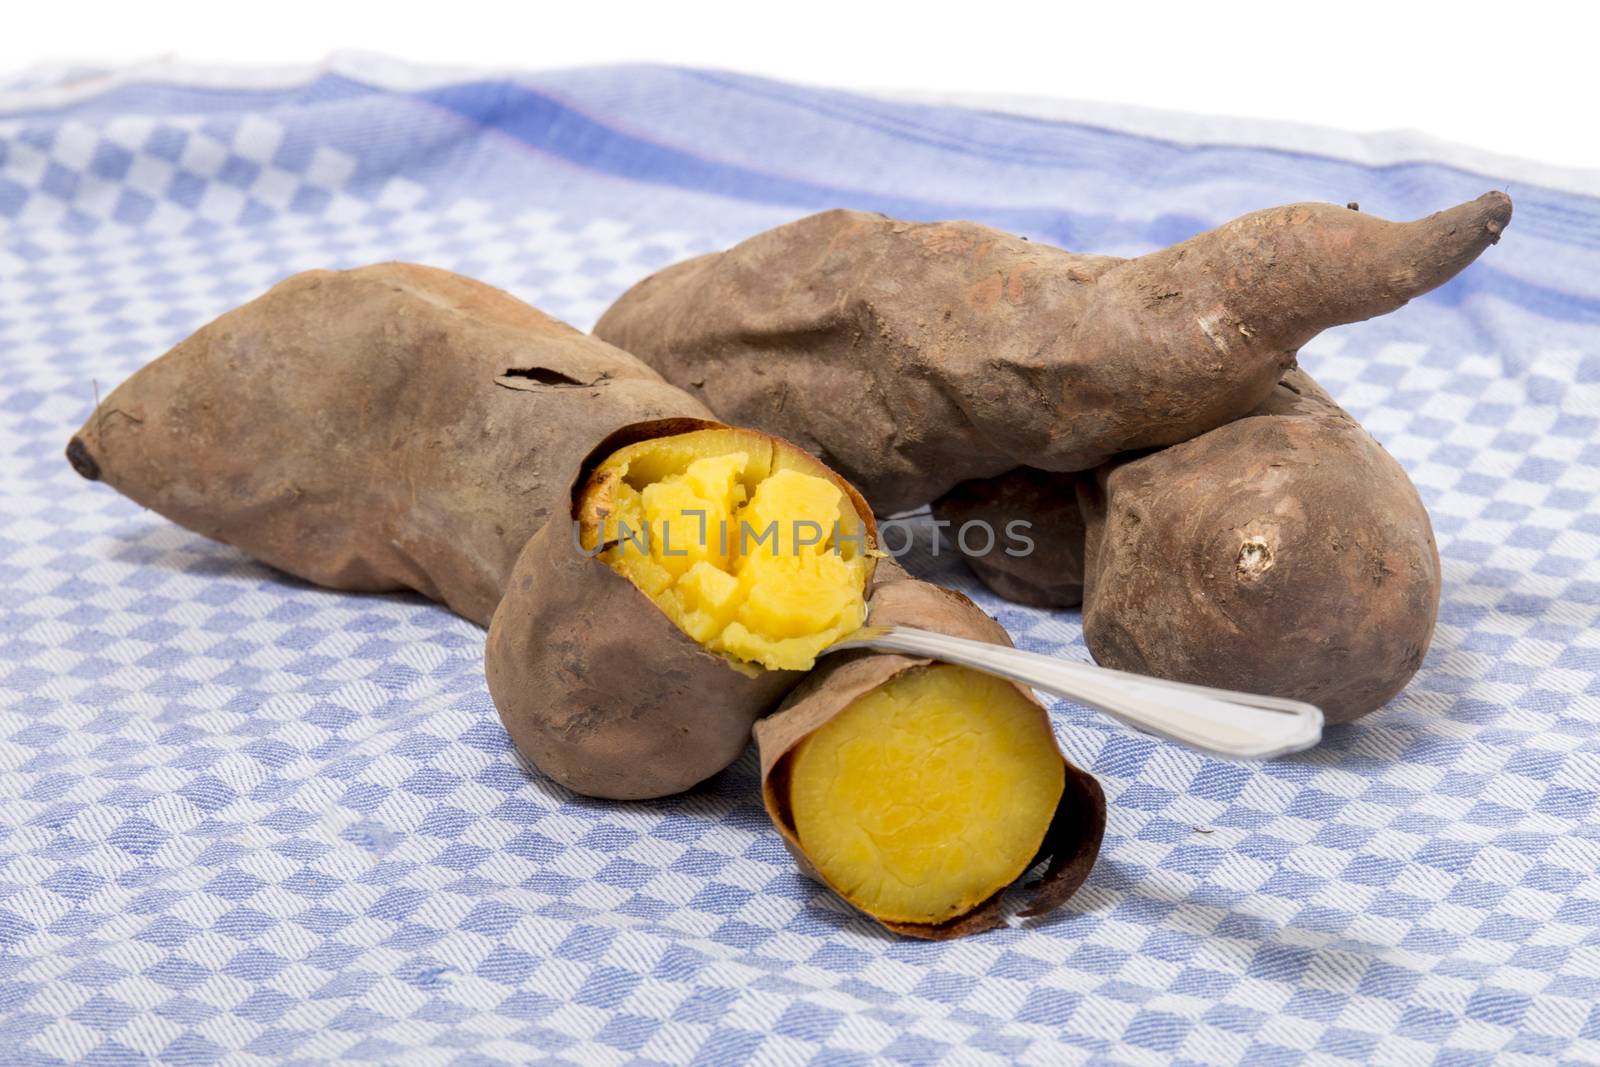 Cooked oven sweet potatoes on a table cloth fabric.